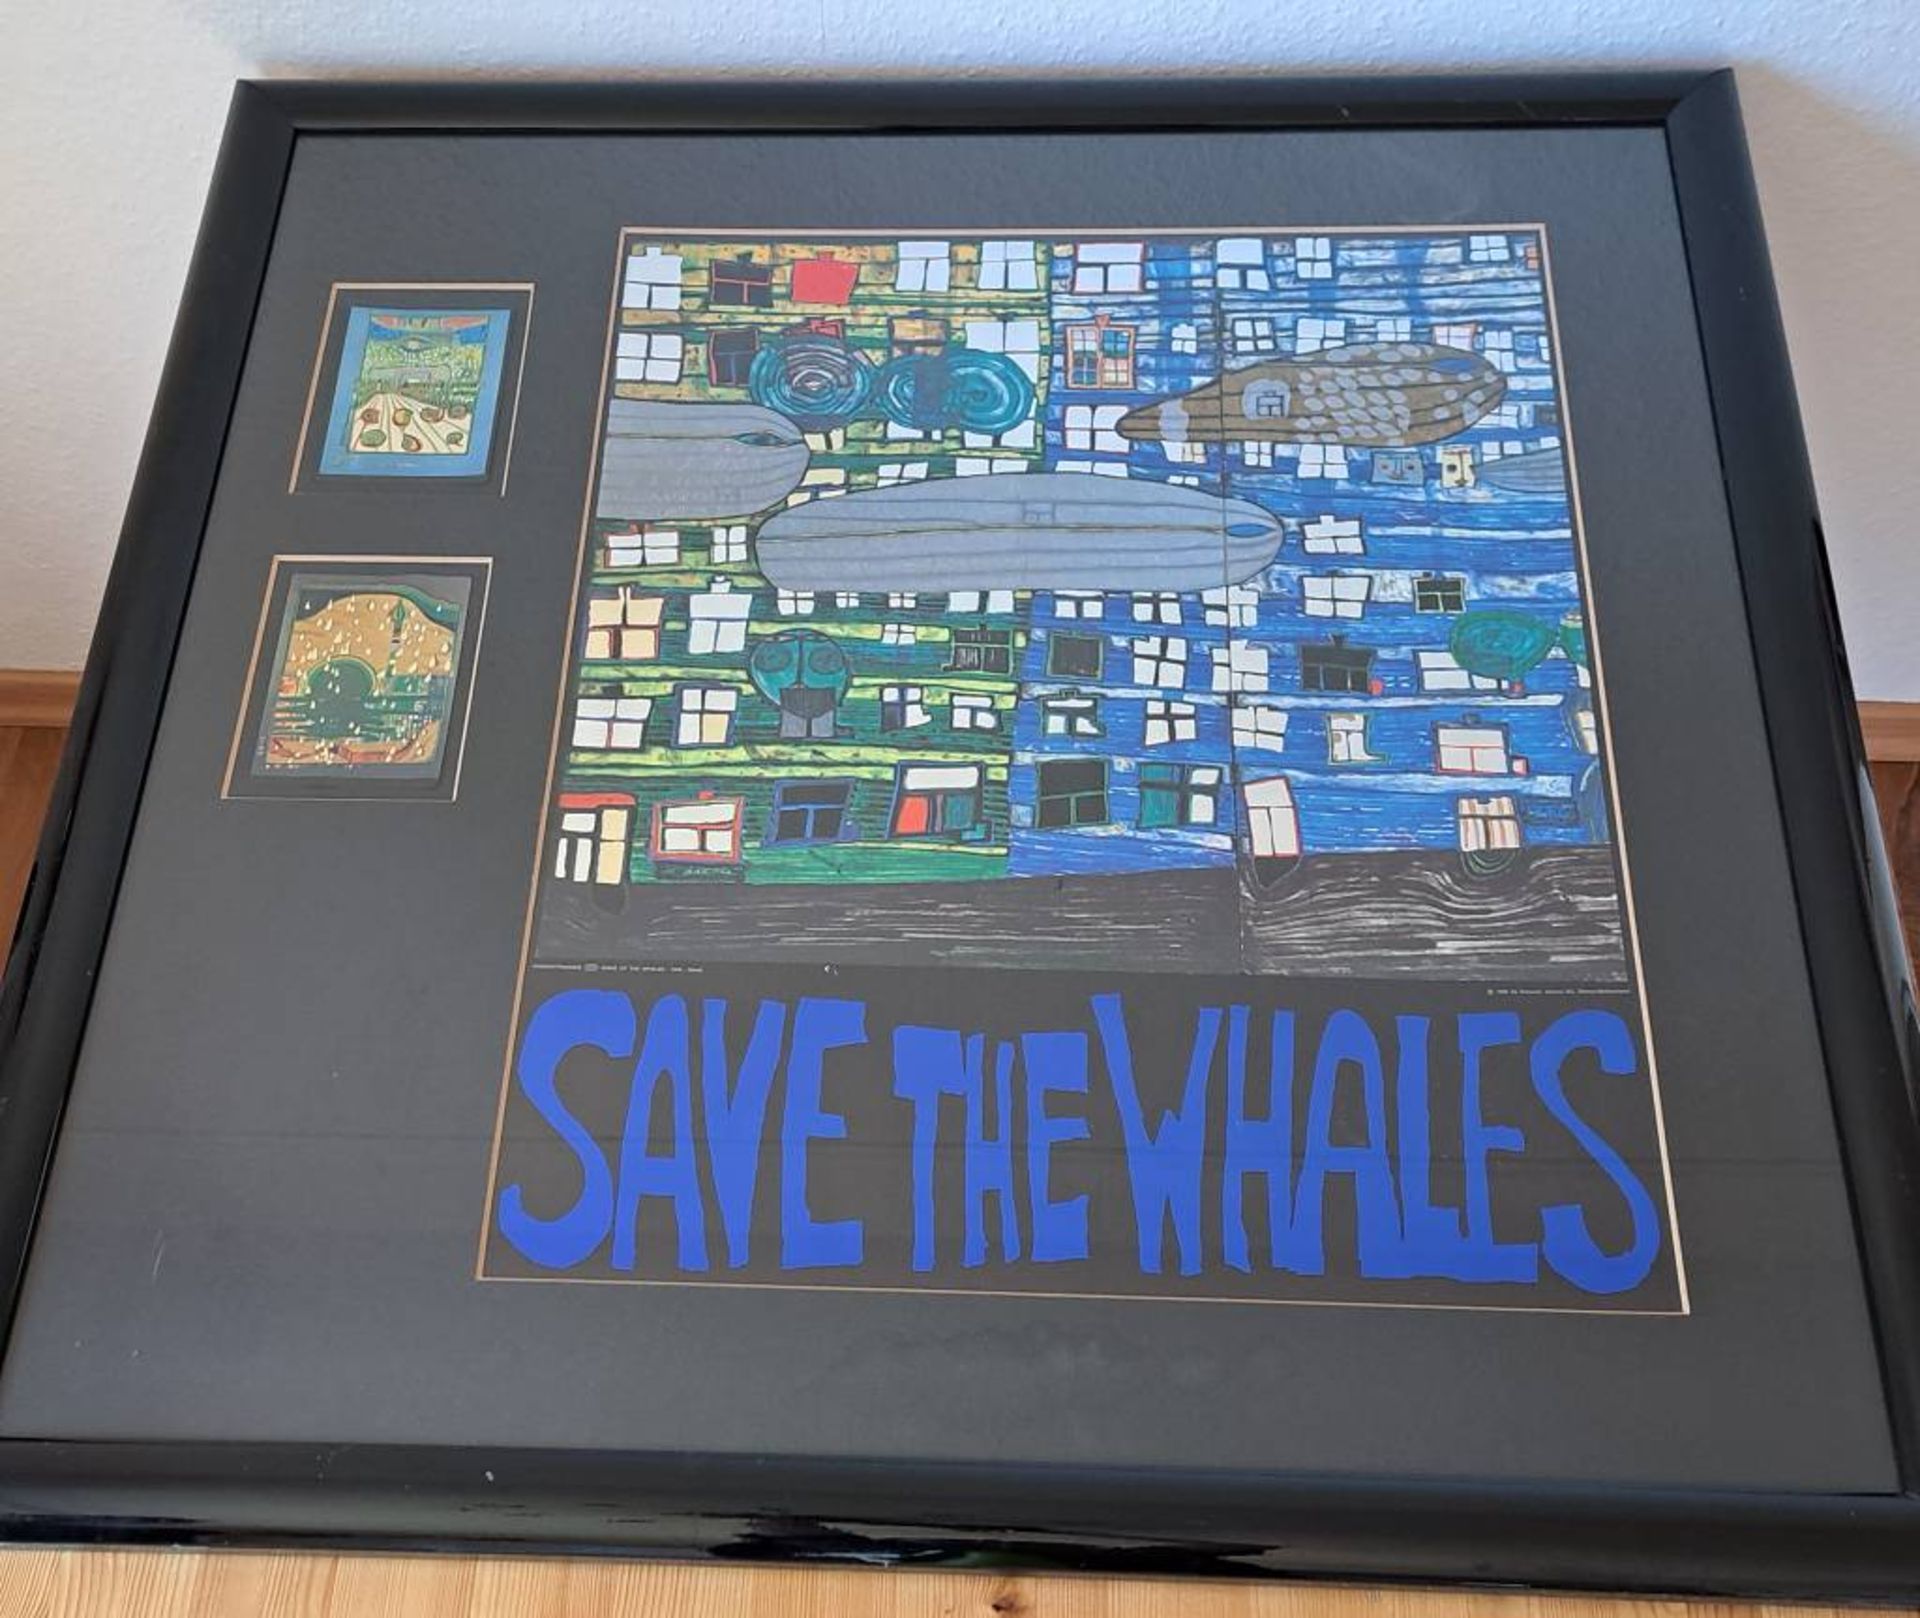 Hundertwasser "Save the Whales" - Image 5 of 6